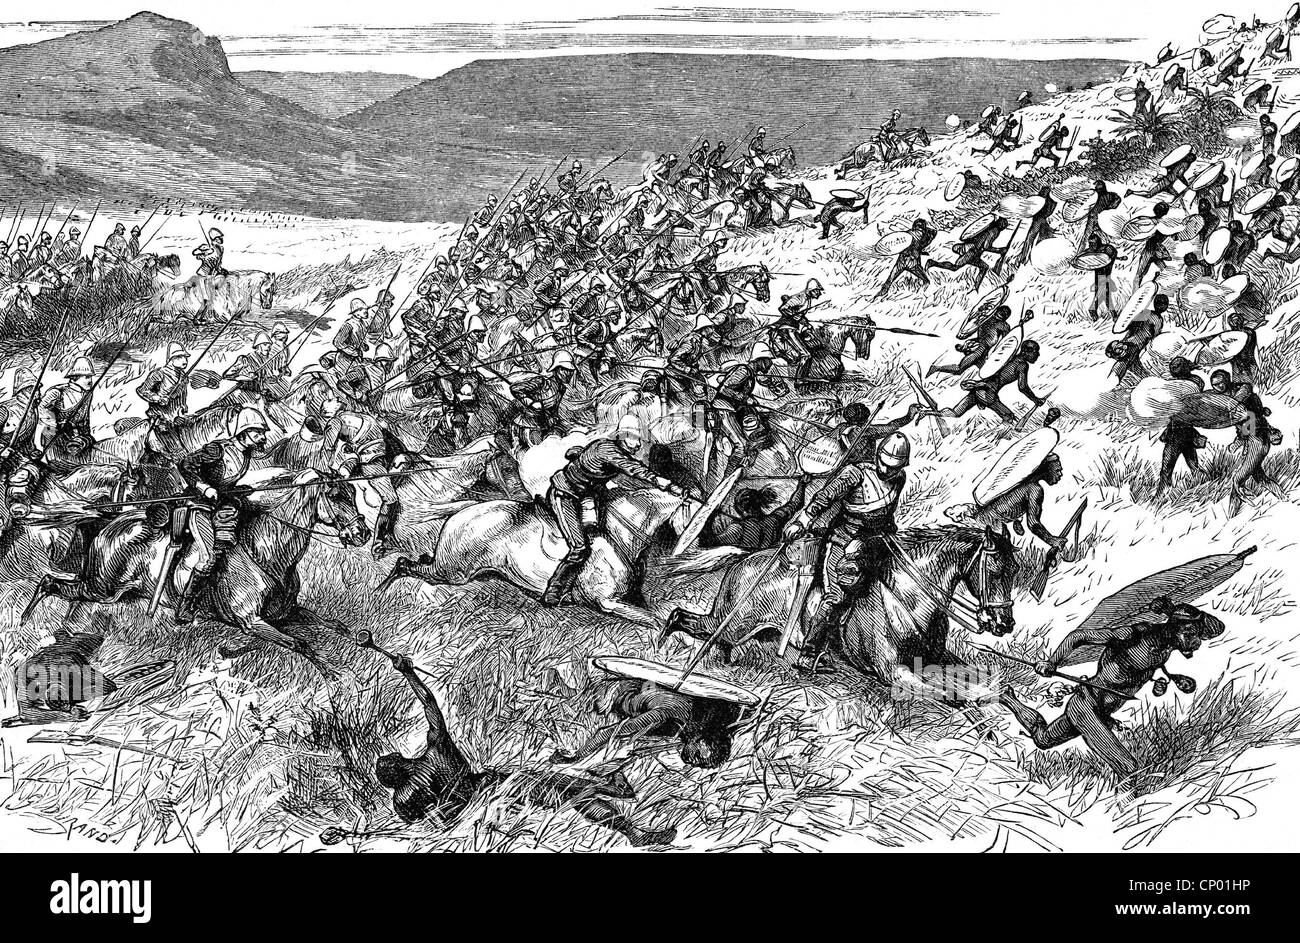 events, Anglo-Zulu War, 1879, Battle of Ulundi, 4.7.1879, British cavalry pursuing fleeing Zulus, wood engraving, 19th century, historic, historical, Uhlan, Uhlans, 19th Lancers, Natives, fight, fighting, riders, steppe, flight, savannah, savanna, colonialism, South Africa, colonial war, people, Additional-Rights-Clearences-Not Available Stock Photo